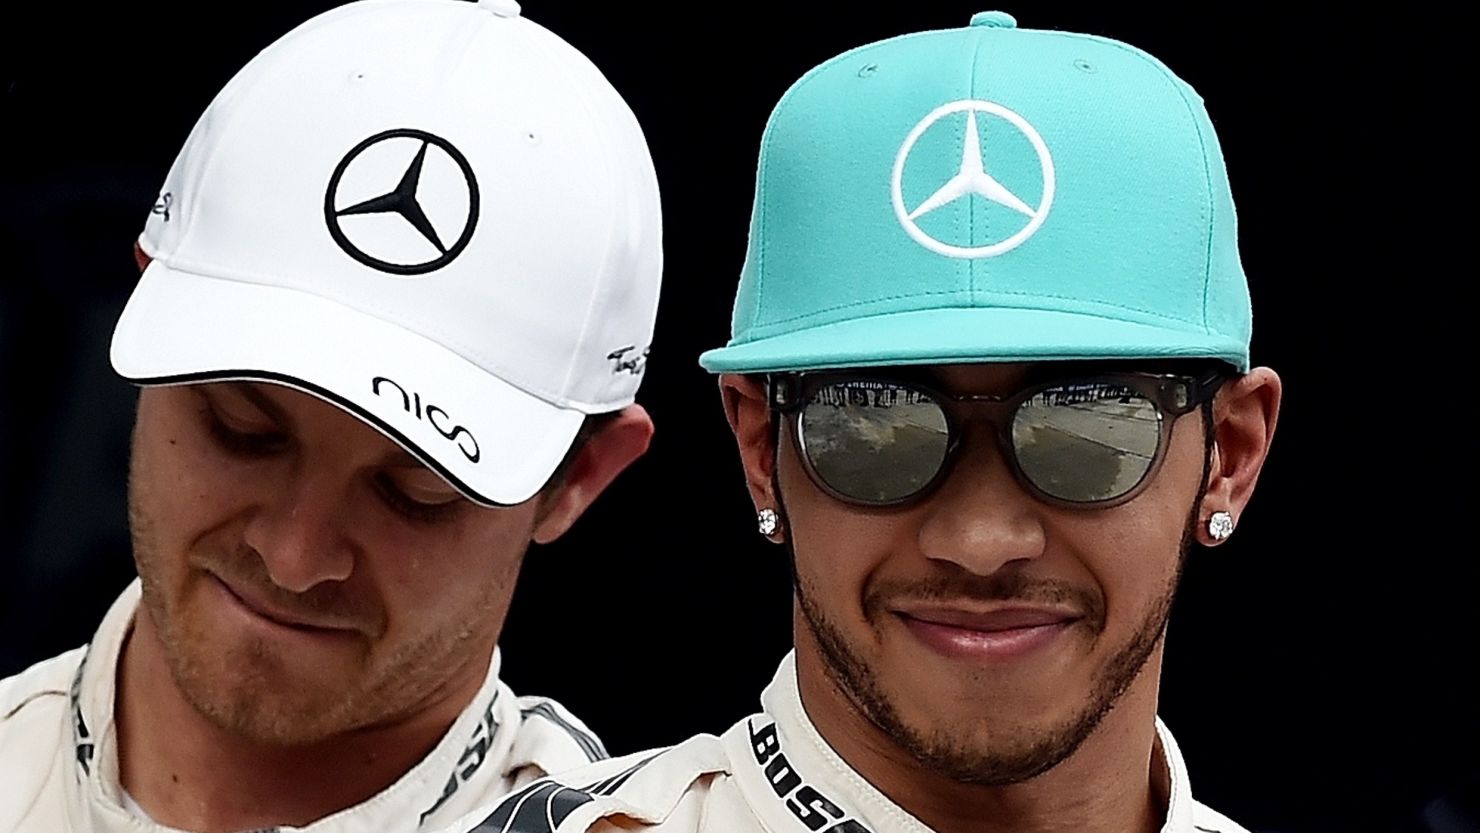 Lewis Hamilton will start the Malaysia GP in pole, with teammate Nico Rosberg in third.